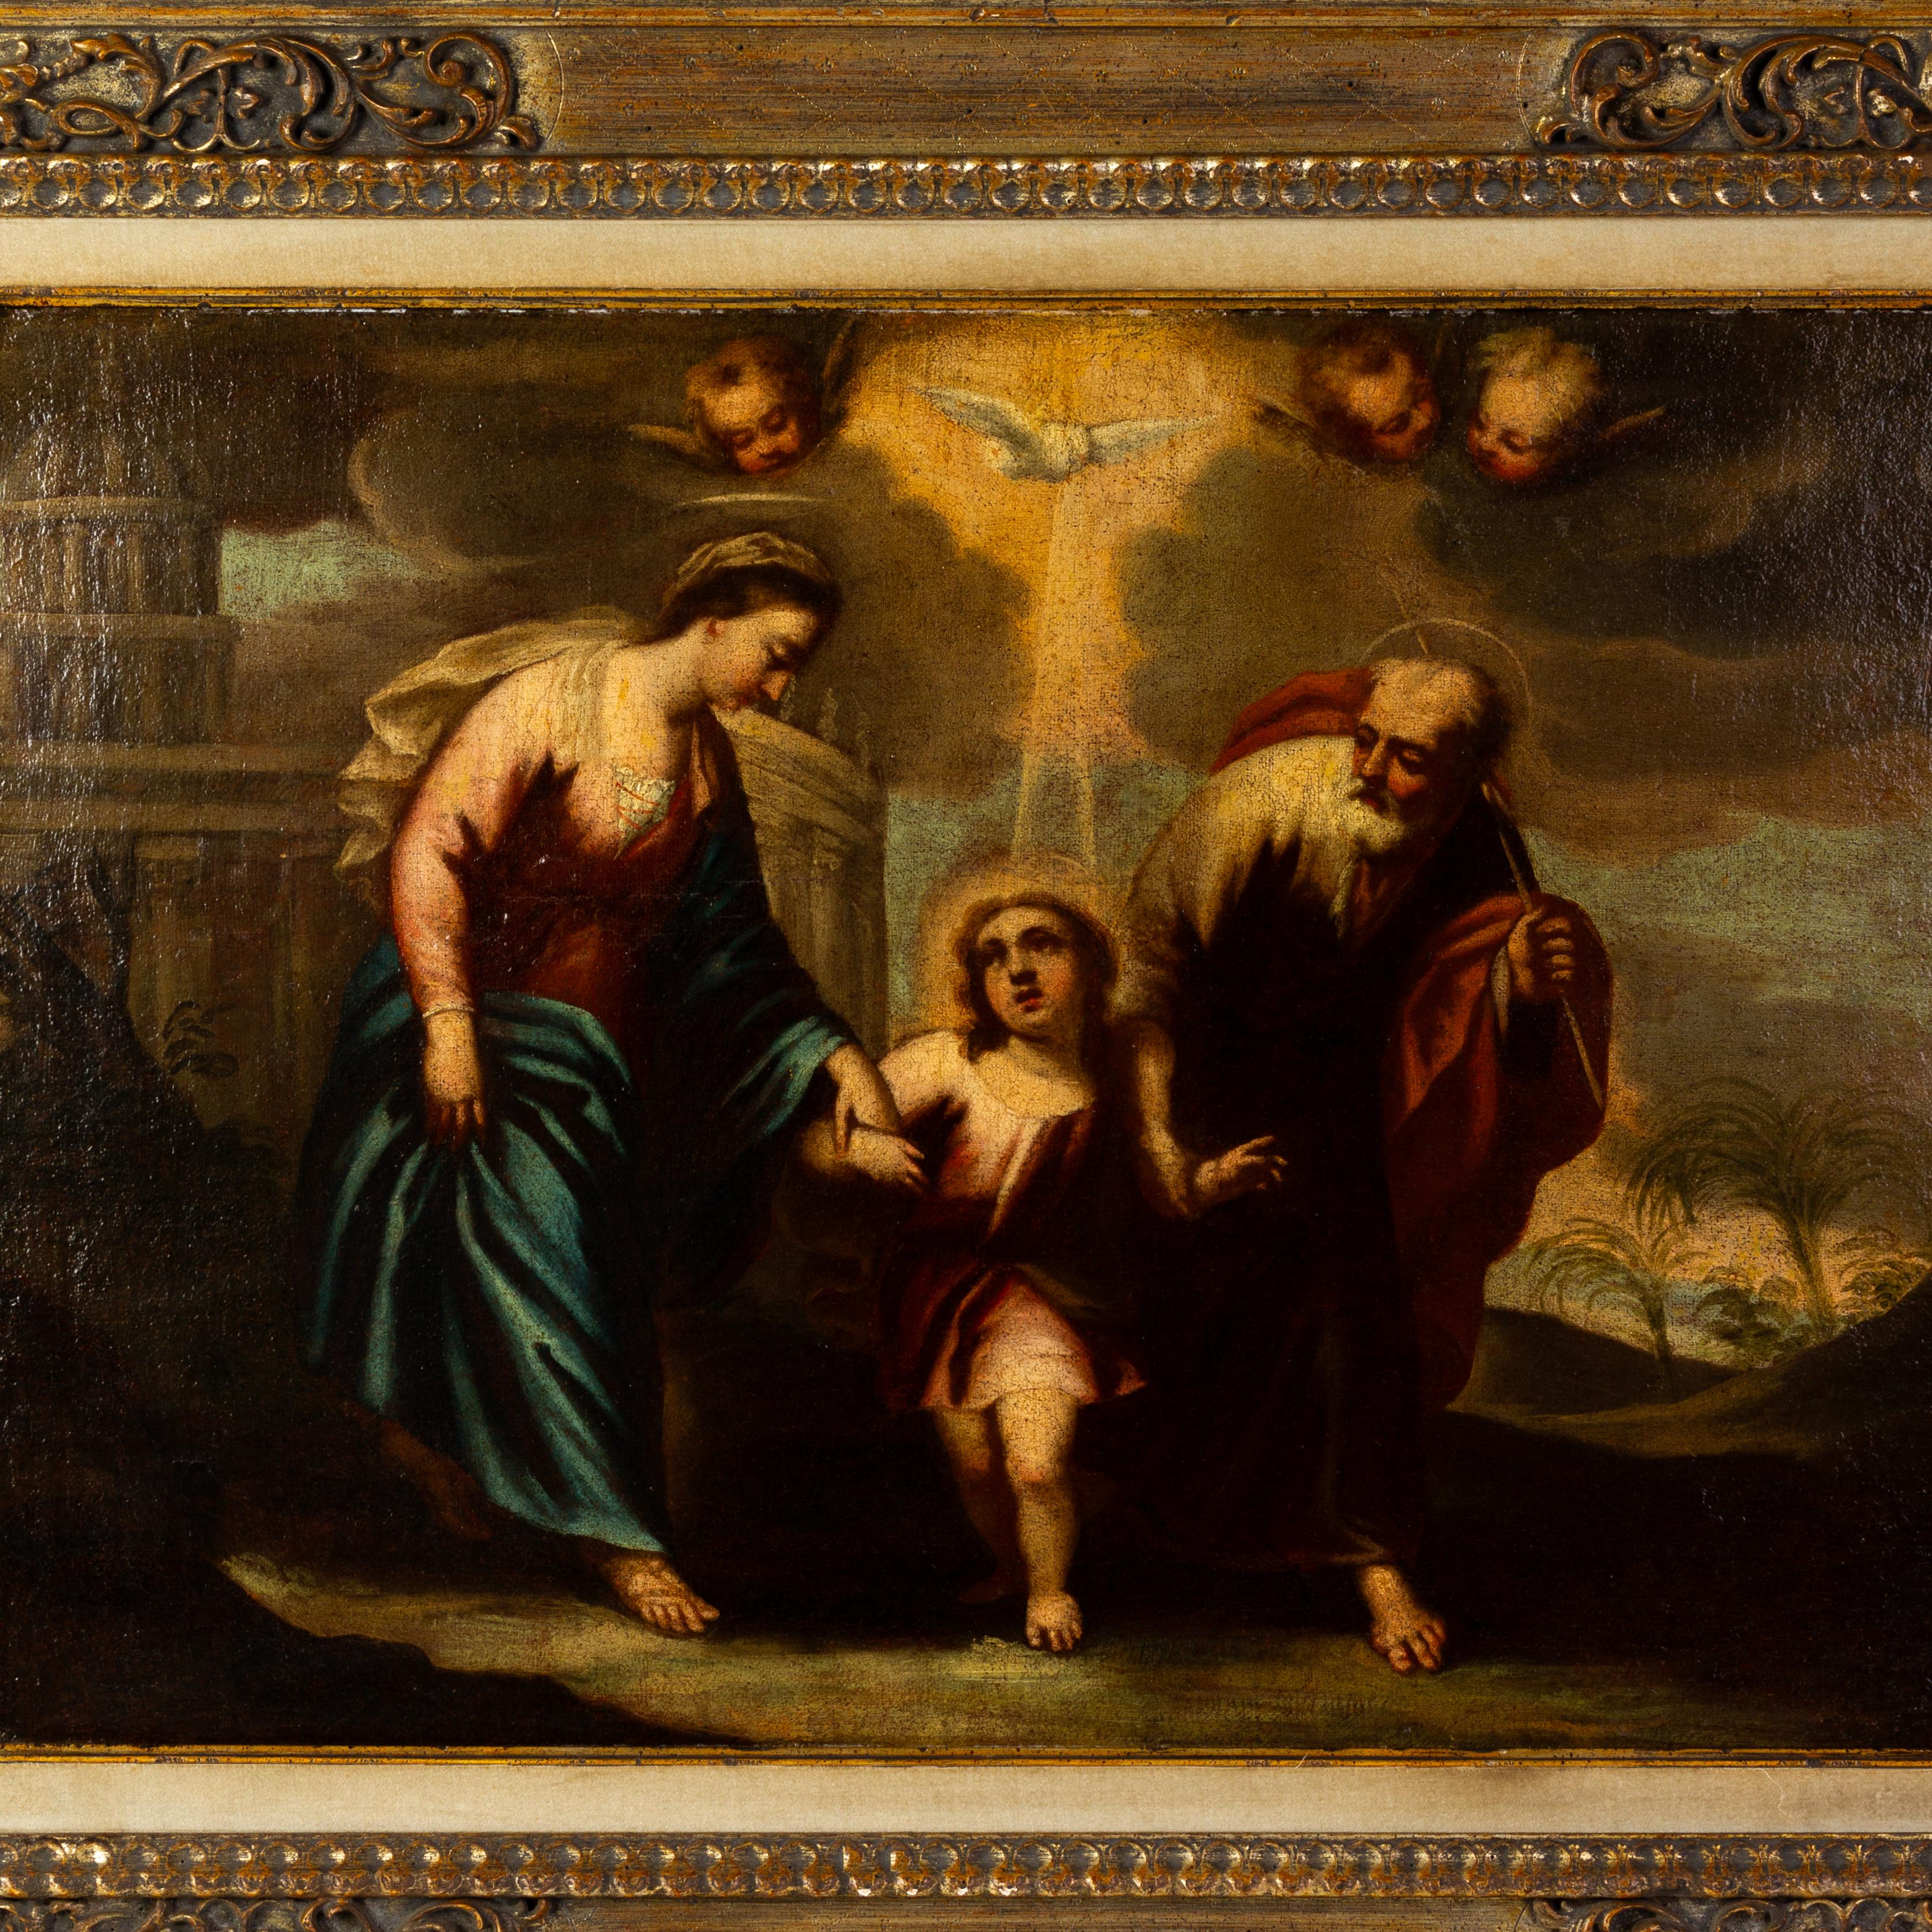 In good condition
From a private collection
Free international shipping
17th Century Lombard Old Master Flight into Egypt 
